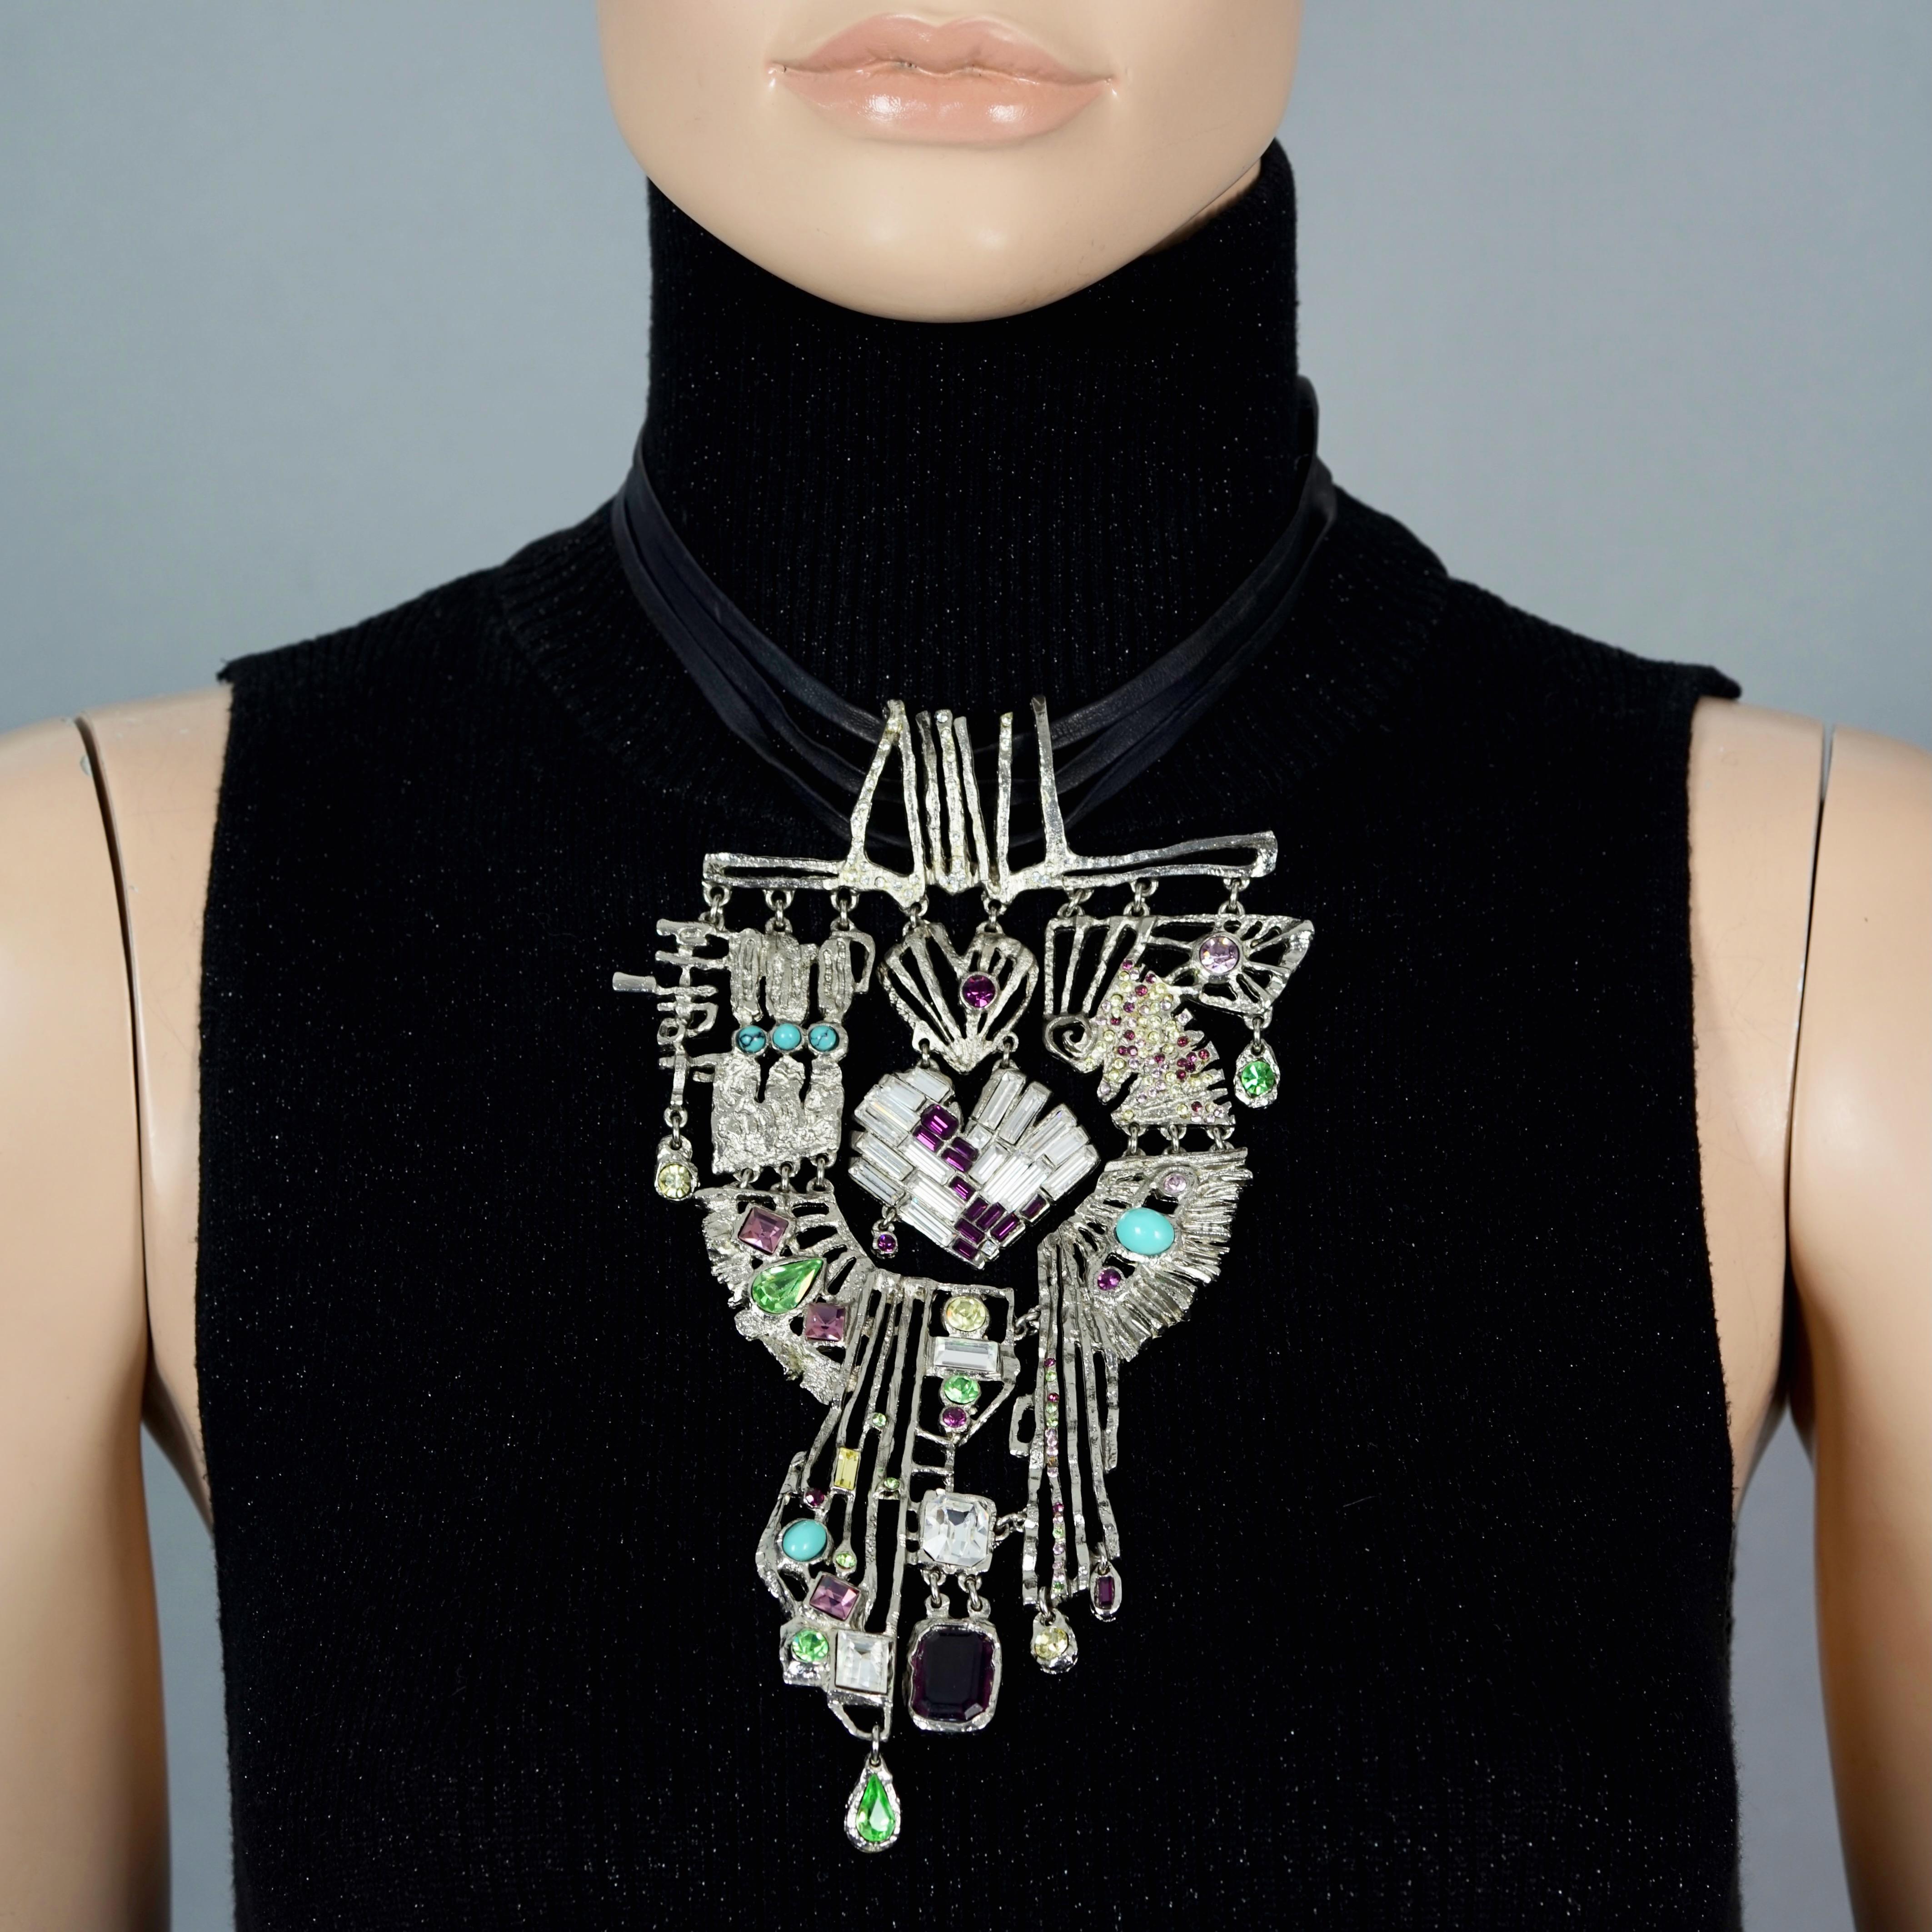 Vintage Massive CHRISTIAN LACROIX Dramatic Jewelled Cross Necklace

Measurements:
Height: 7.87 inches (20 cm)
Width: 4.72 inches (12 cm)
Wearable Length: 14.37 inches (36.5 cm) until 15.94 inches (40.5 cm)

Features:
- 100% Authentic CHRISTIAN